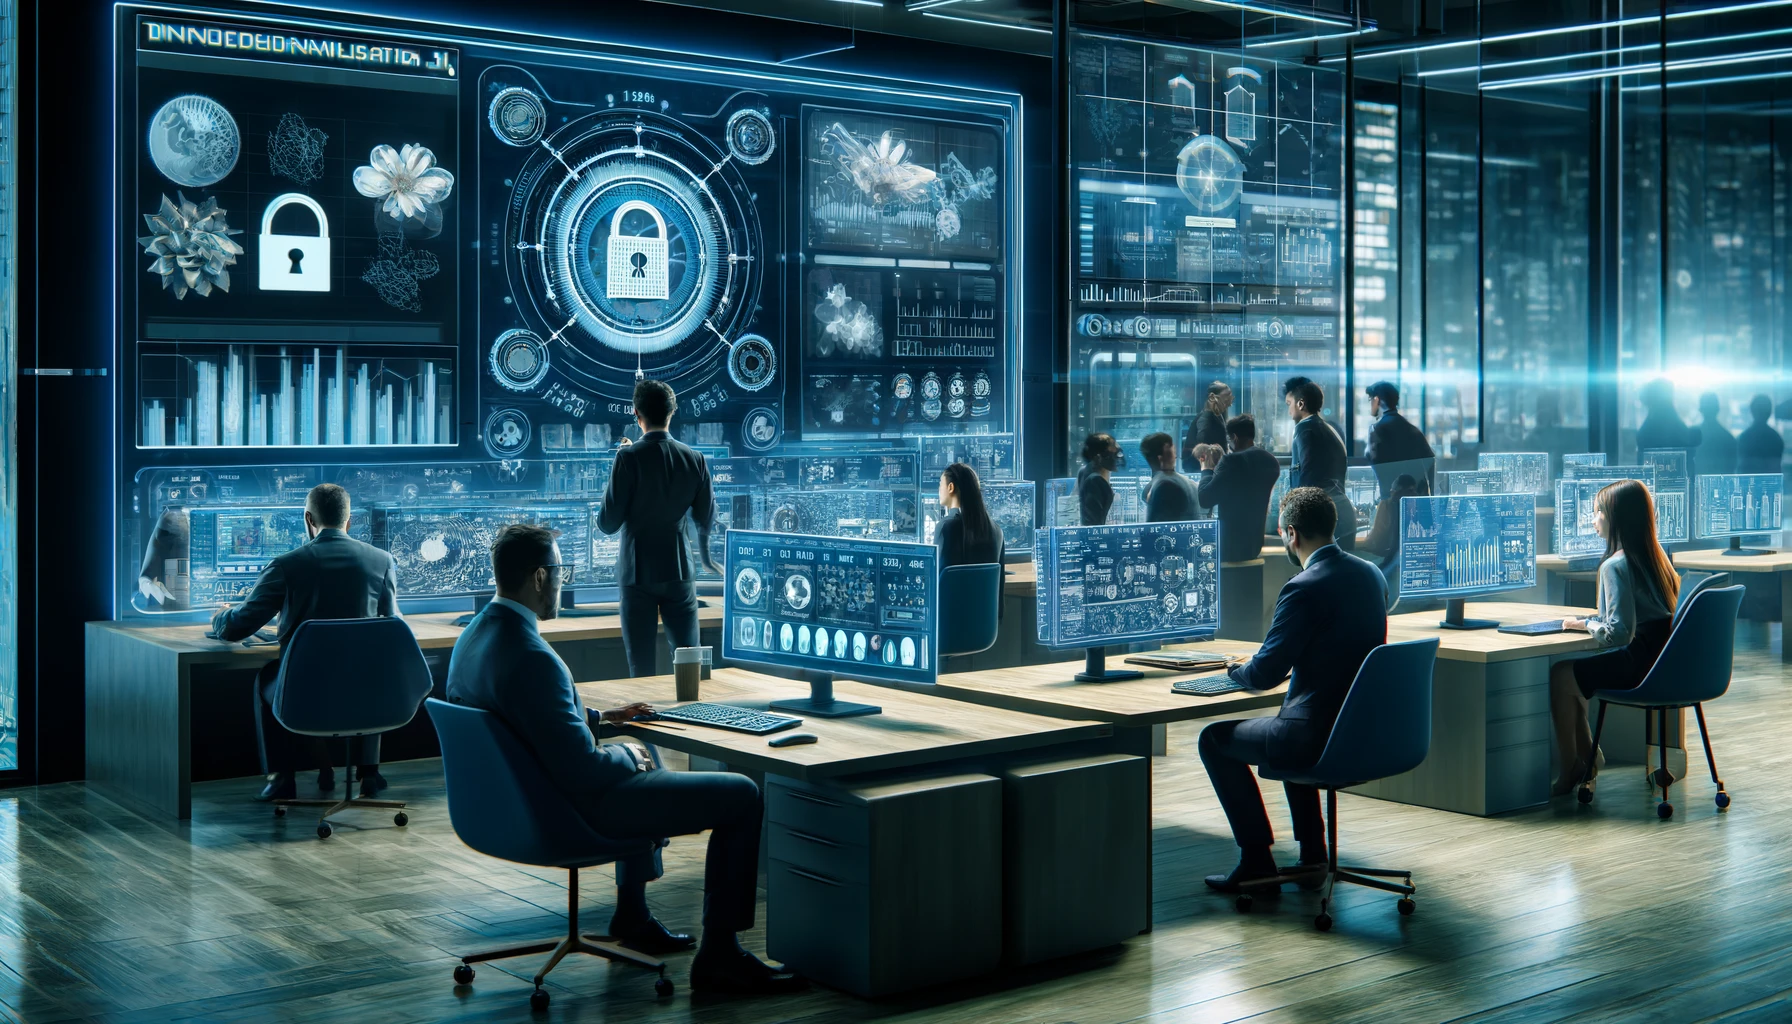 An image depicting a modern financial technology office, where AI is applied in bank fraud detection. This scene shows a team of experts utilizing advanced technologies to analyze and prevent fraudulent activities in the banking sector.